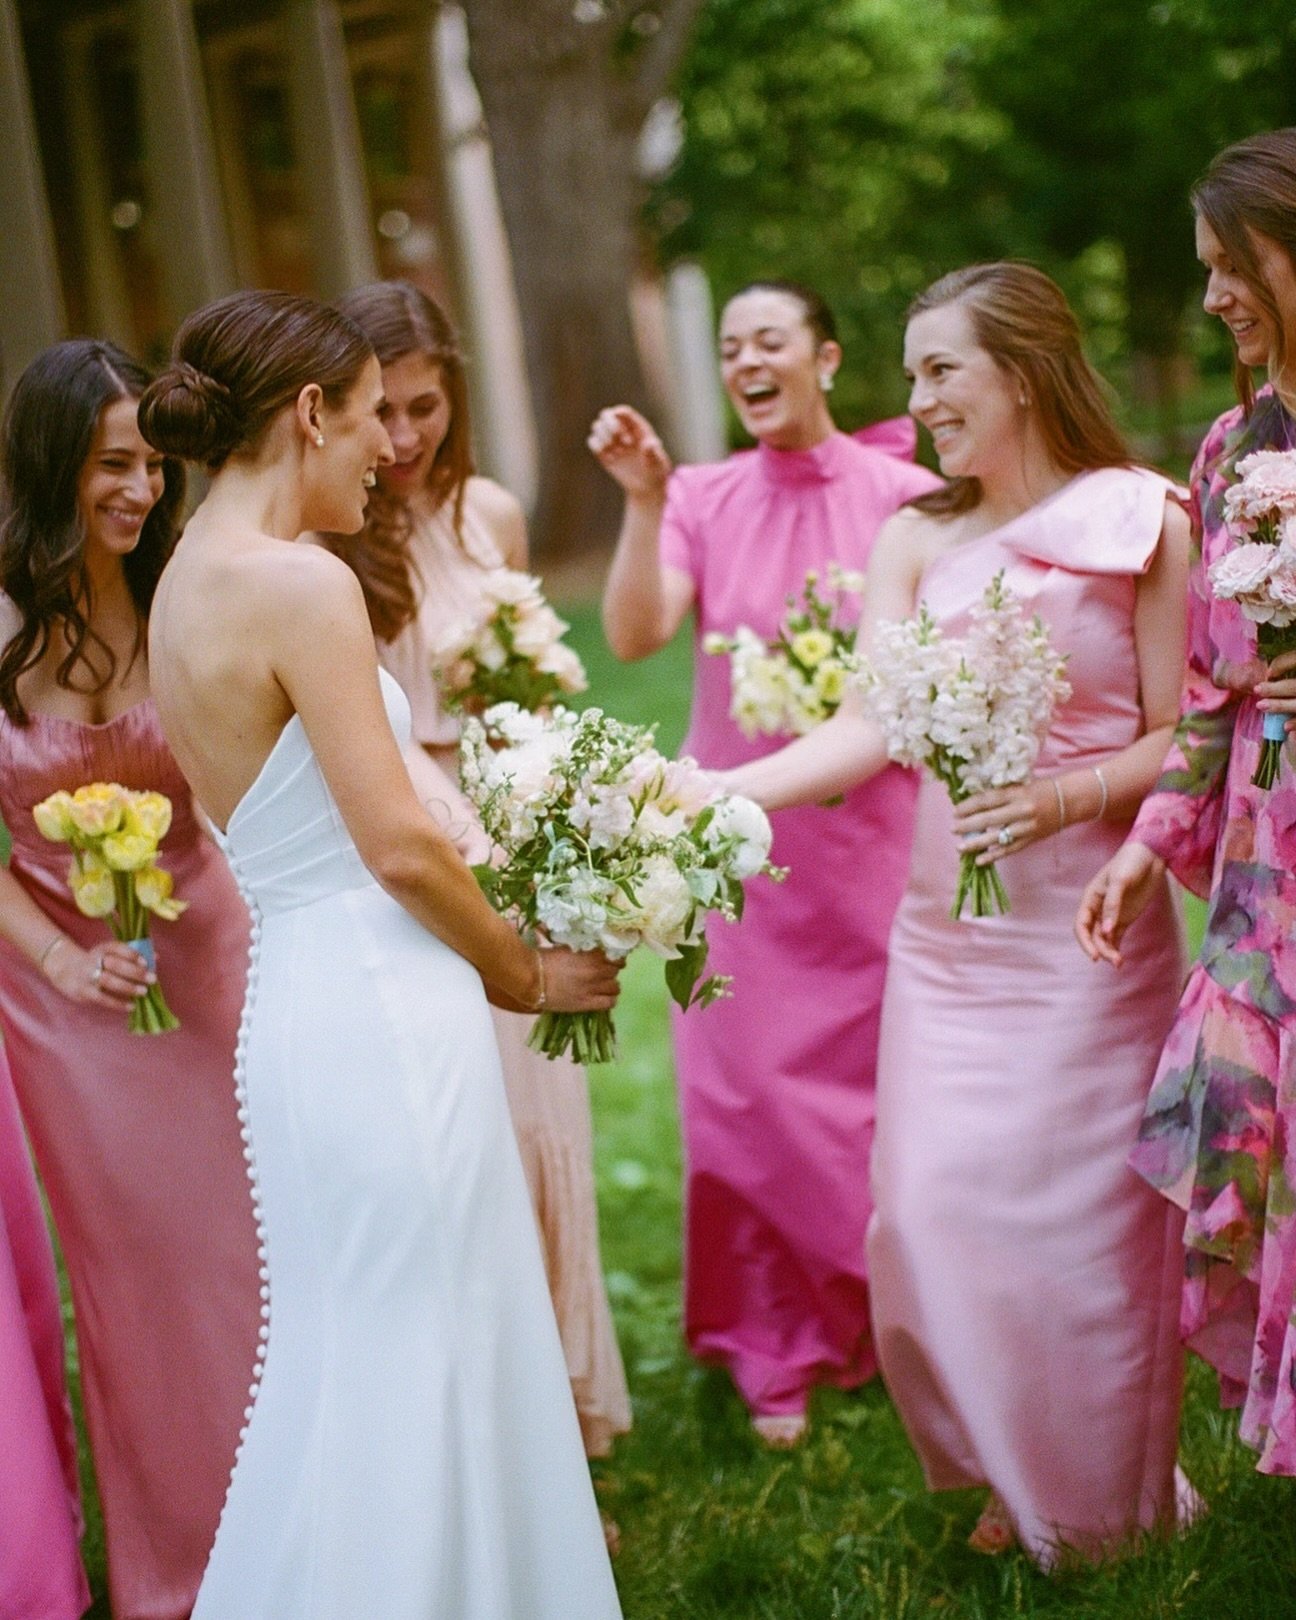 &ldquo;look how cute that sweet pea in your bouquet is!!!&rdquo; - me, as a bridesmaid 🤣🩷 Kathryn, it was such an honor to stand by your side on your big day AND be your planning partner in this process (wouldn&rsquo;t have been possible without my